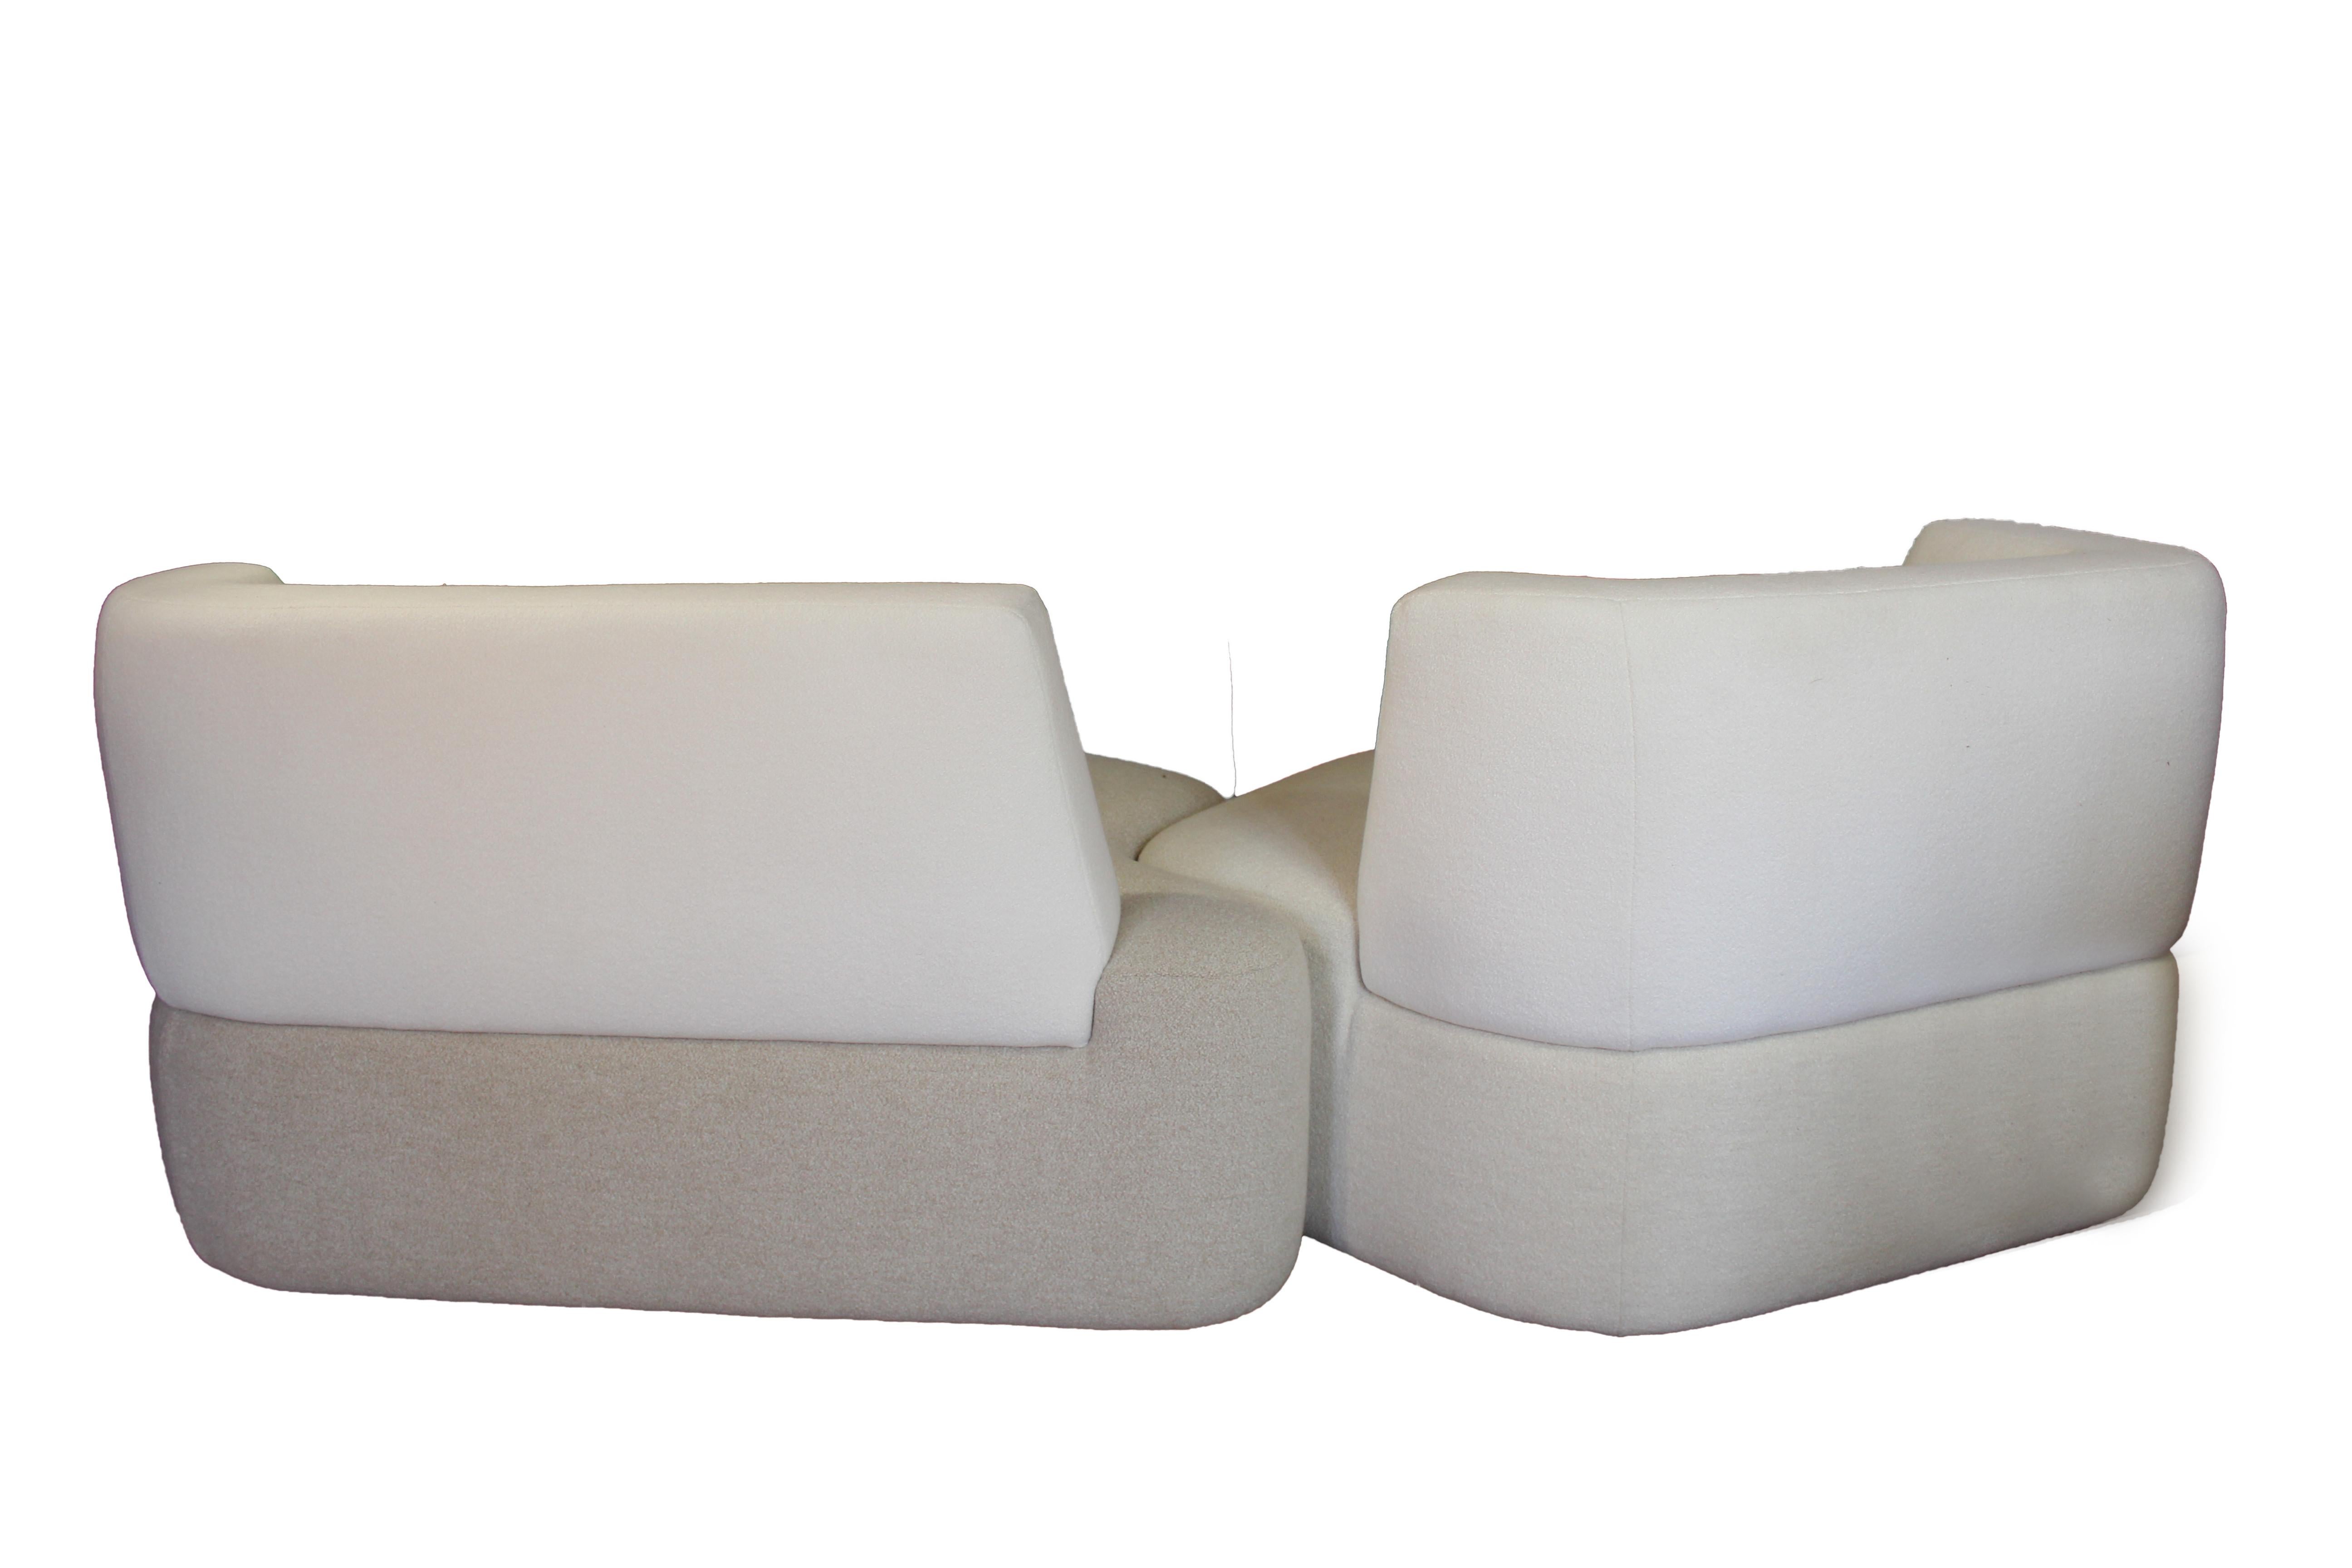 French Sofa Pierre in White Cream Wool 2 Modules Made in France Customizable For Sale